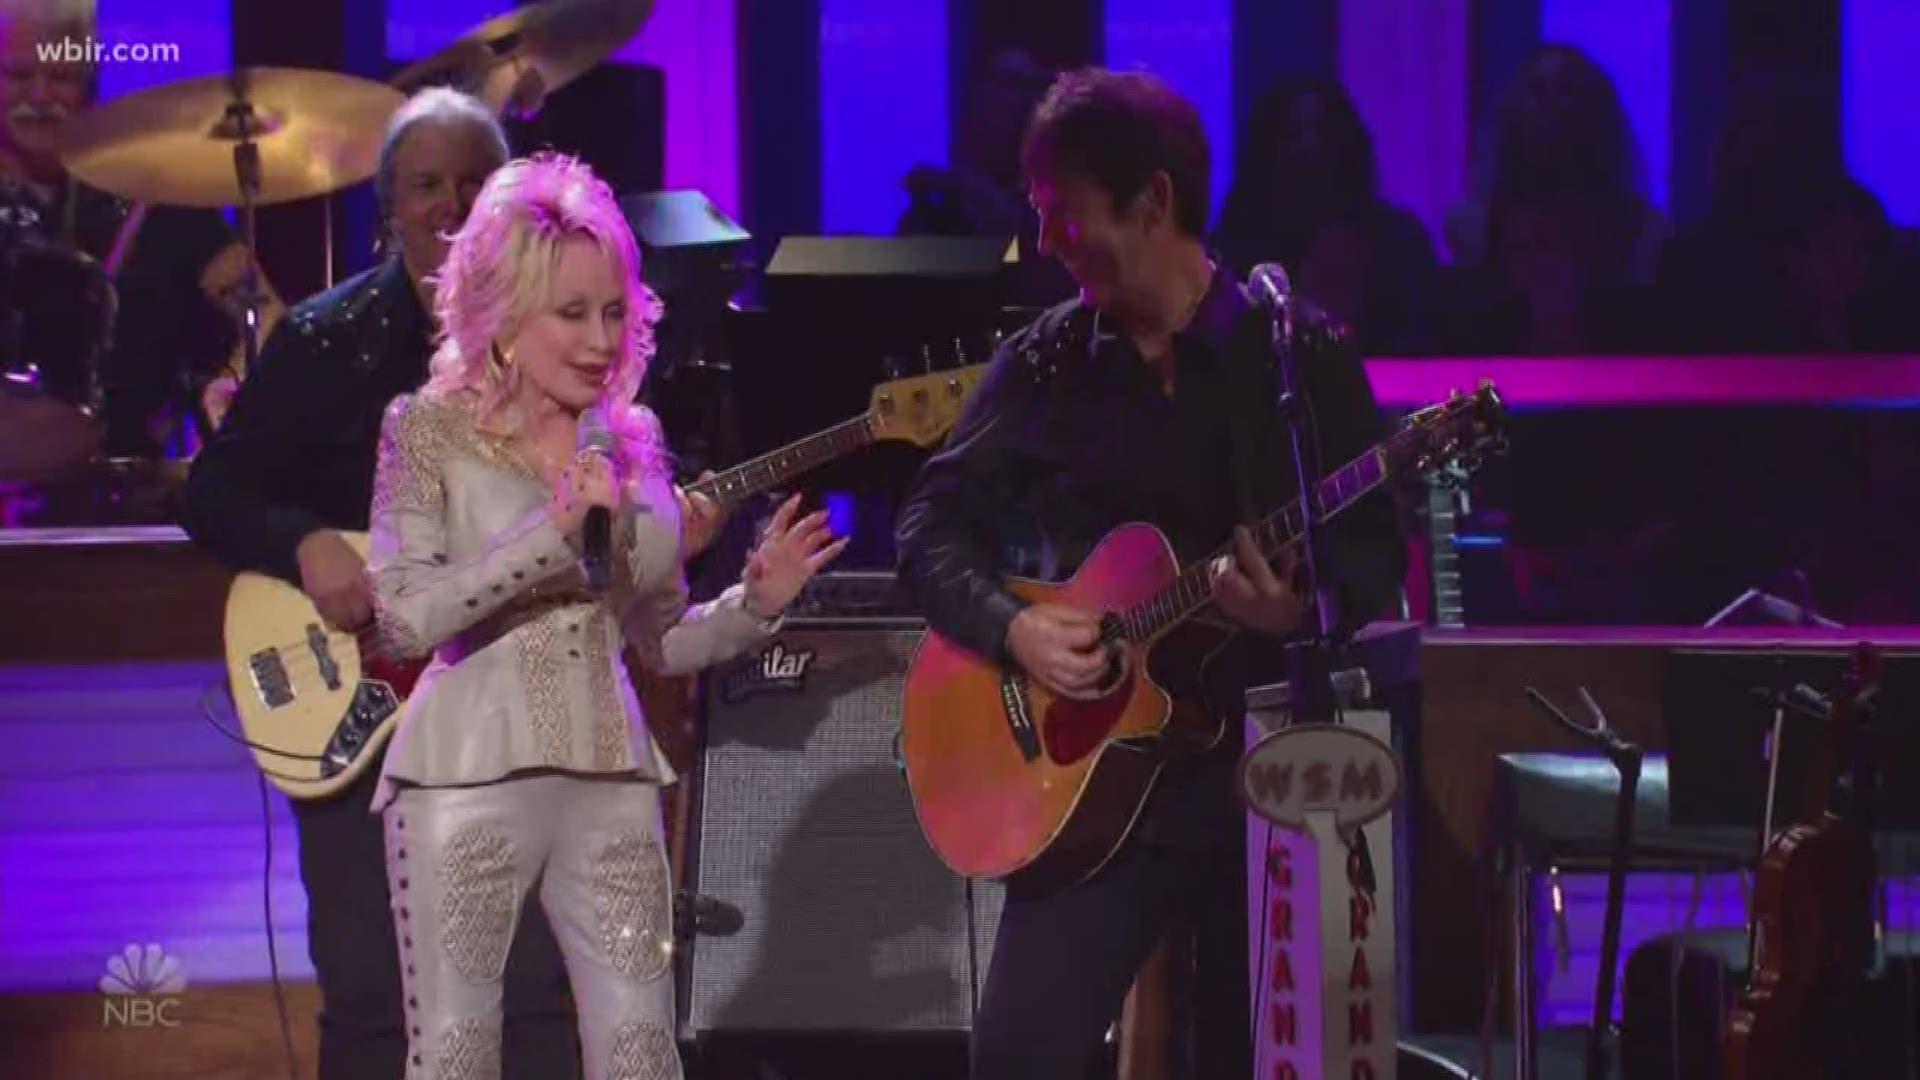 Dolly Parton to perform at Gift of Music charity concert